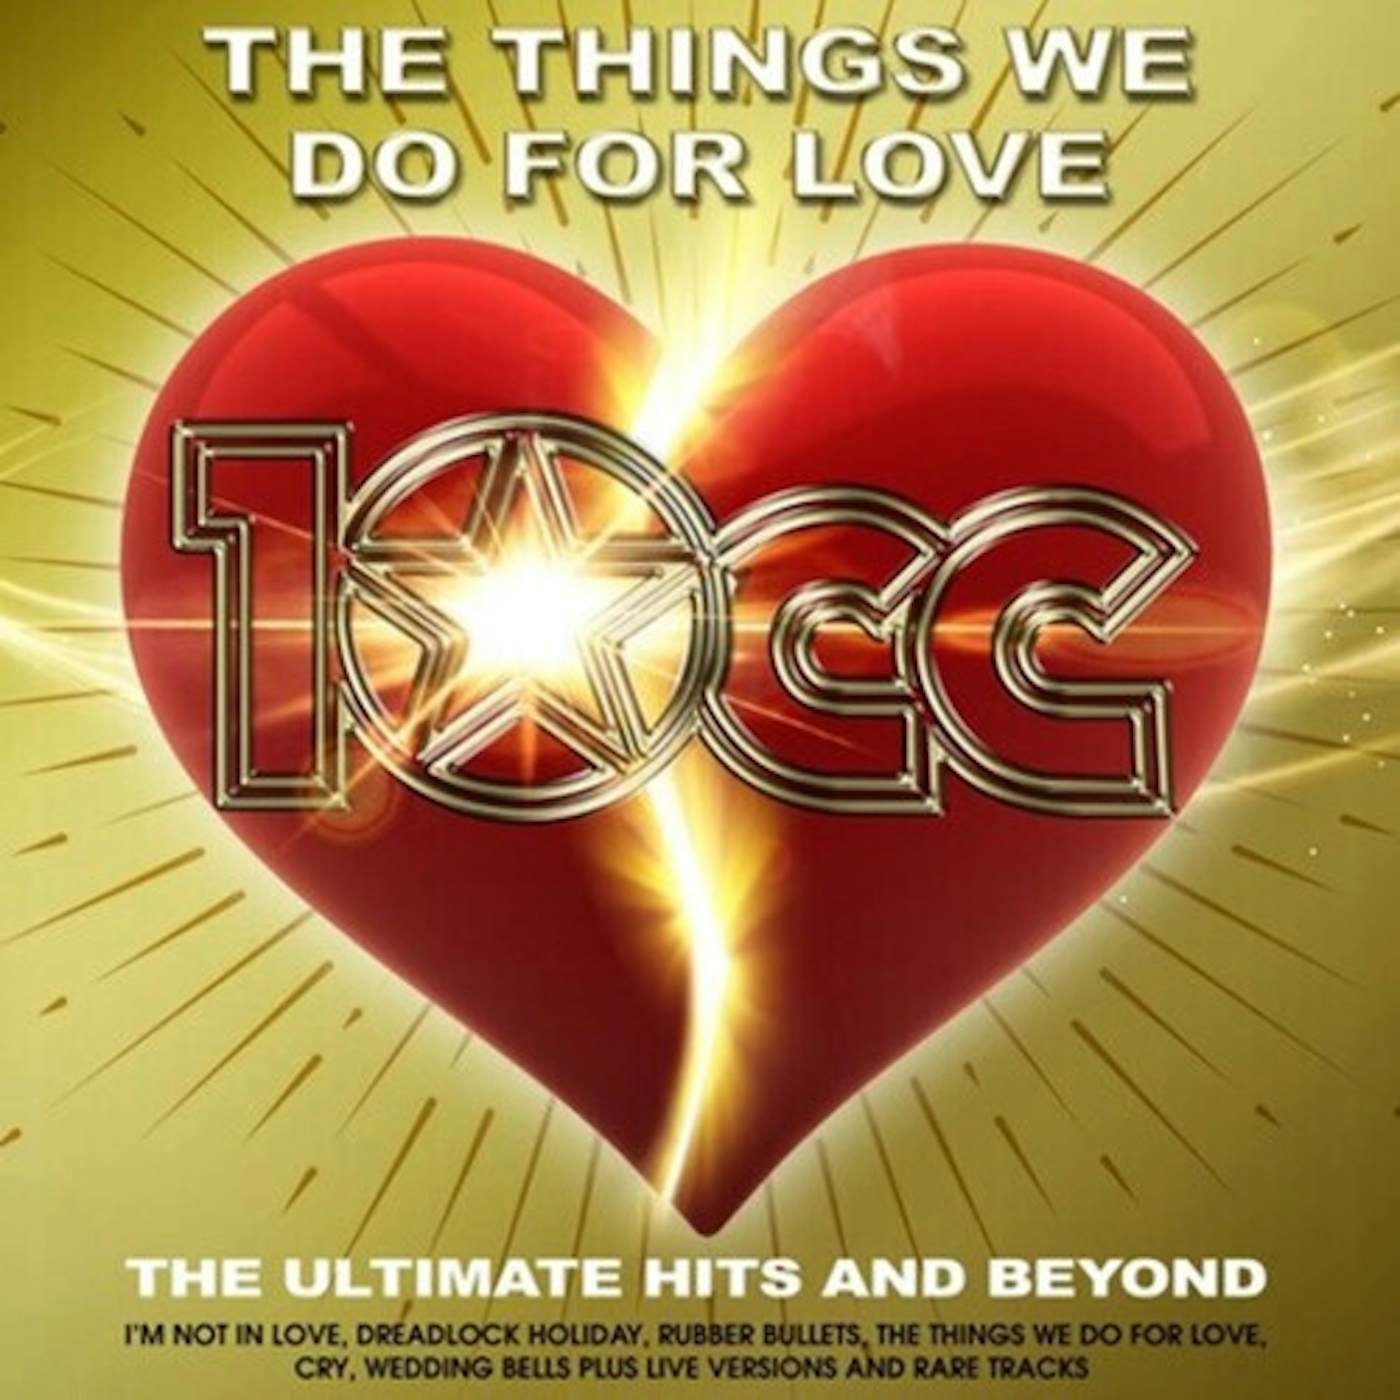 10cc THINGS WE DO FOR LOVE CD